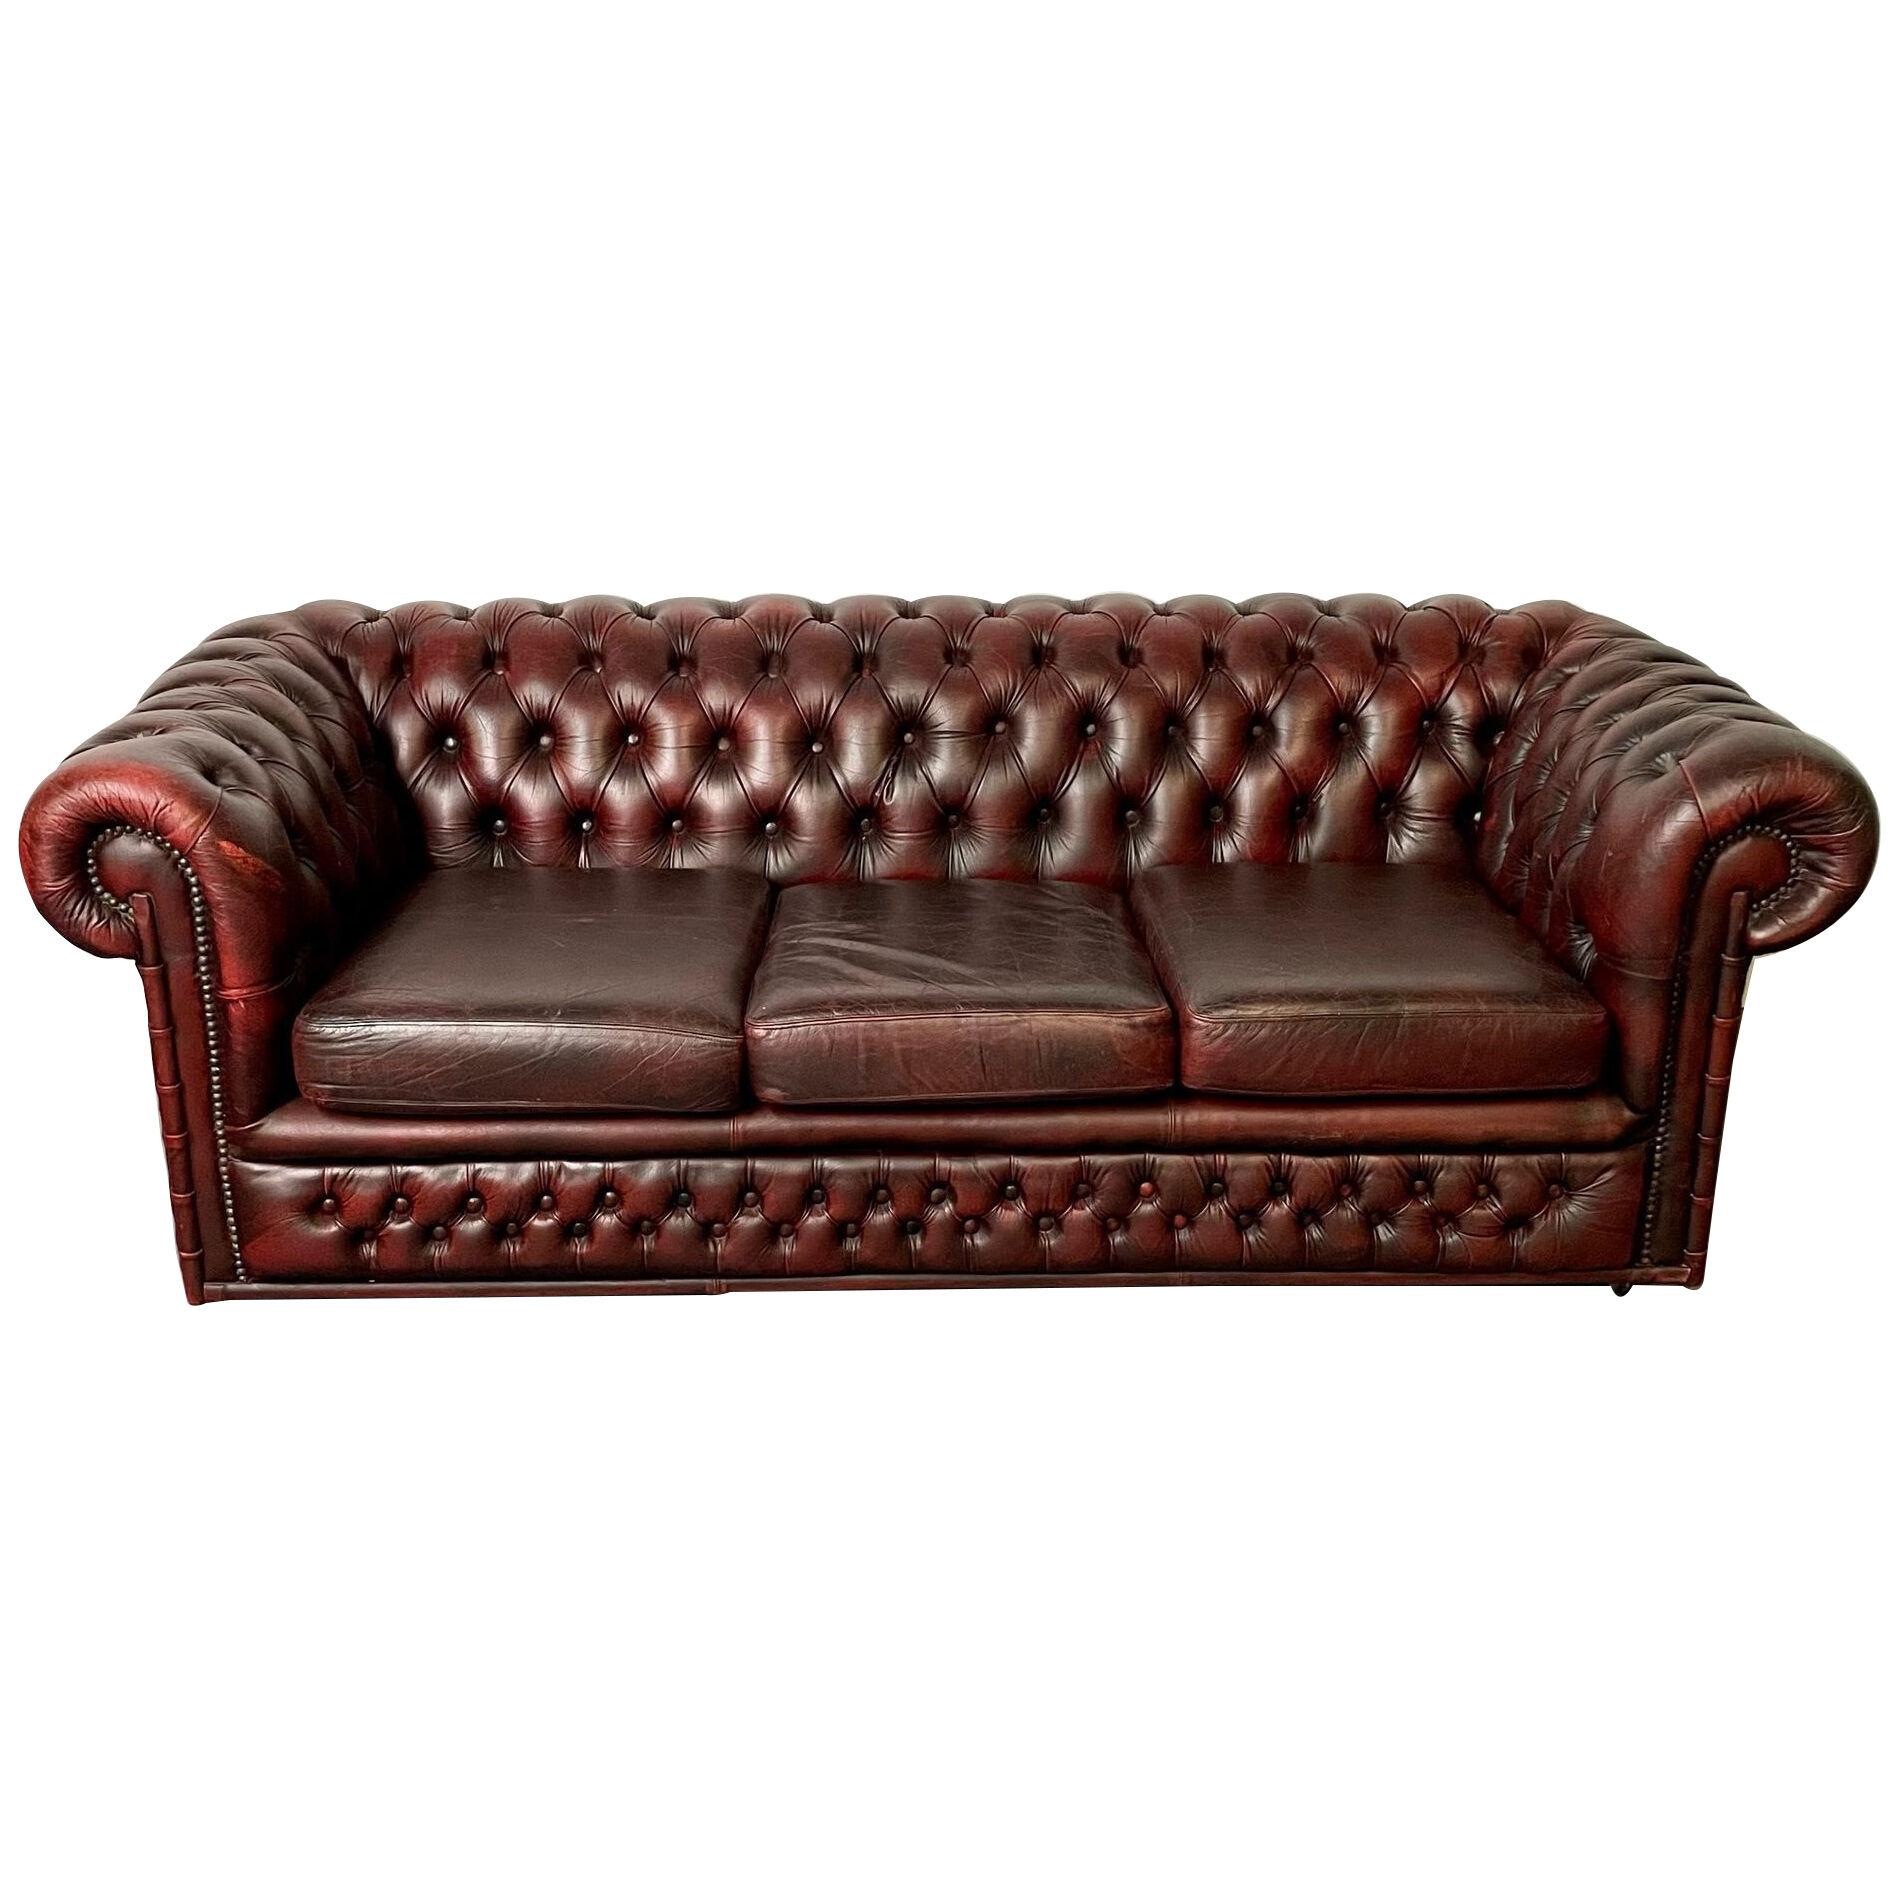 Georgian Oxblood Leather Chesterfield Sofa, Settee Faux Bamboo Front, Tufted